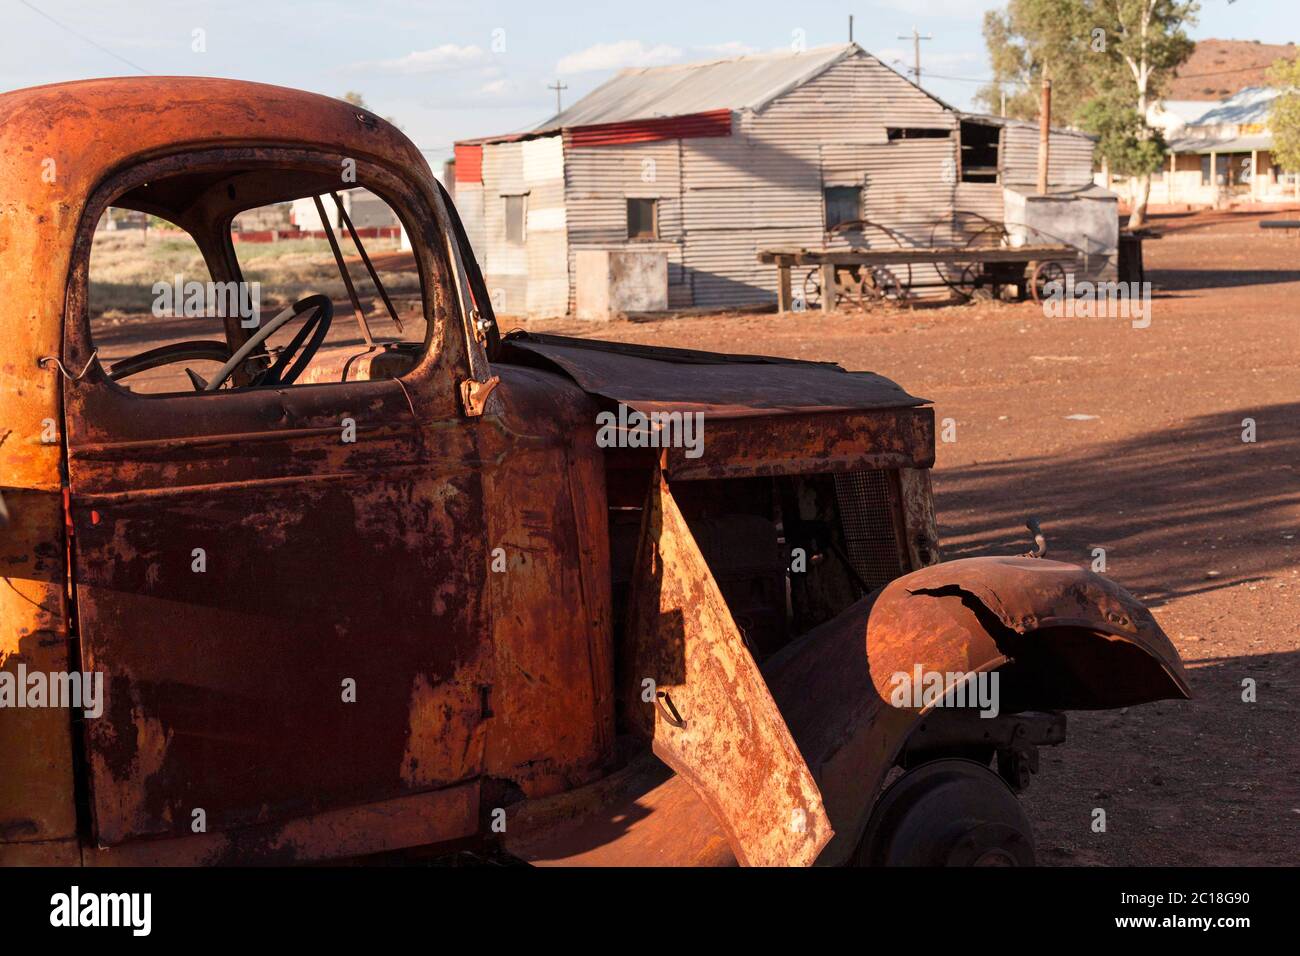 Rusty truck and corrugated iron house of the historical gold mining town Gwalia, Leonora Western Australia Stock Photo